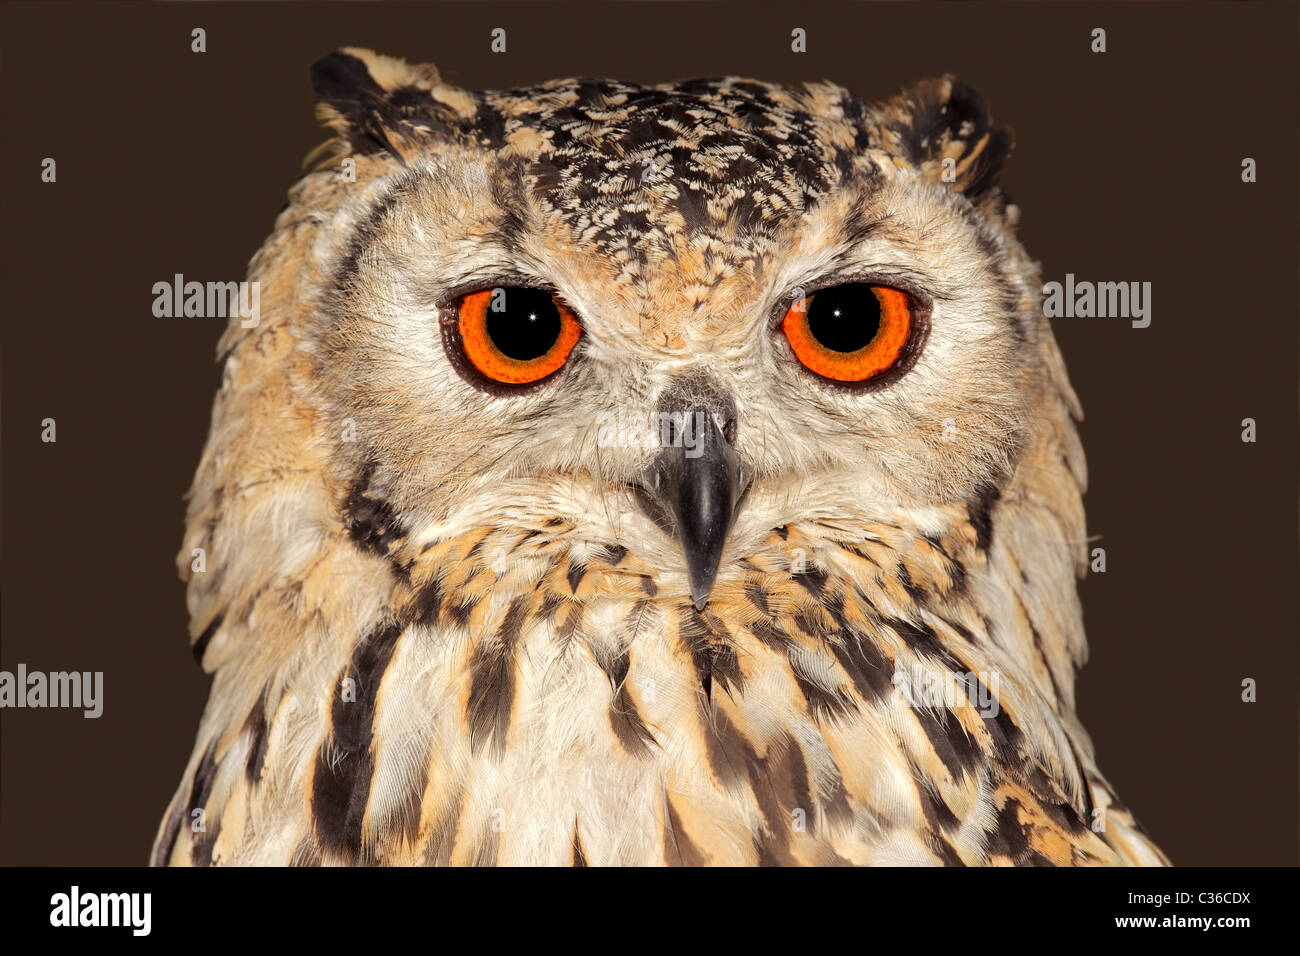 Close-up portrait of a Bengal eagle owl (Bubo bubo bengalensis) Stock Photo